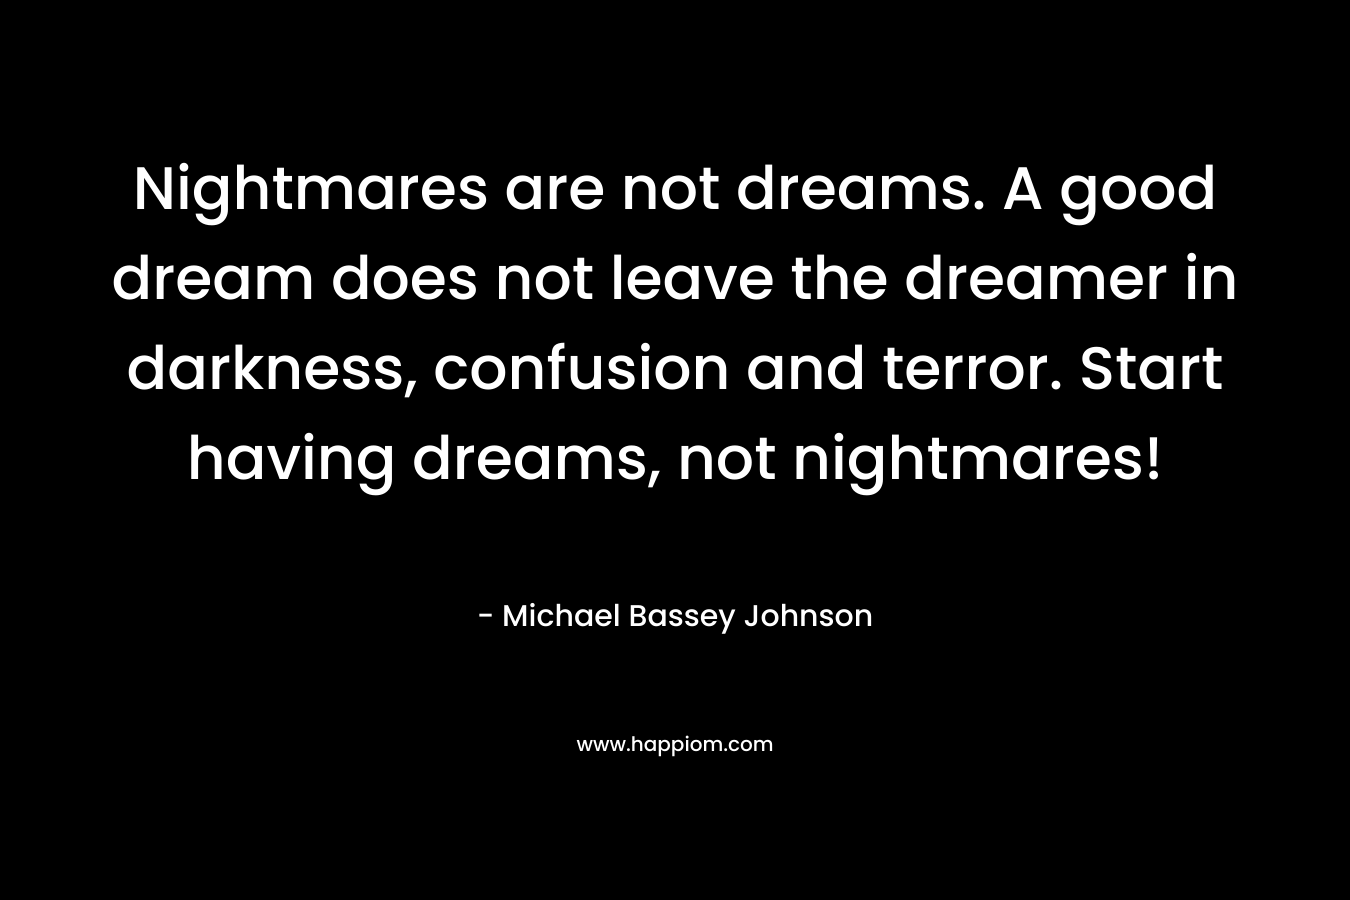 Nightmares are not dreams. A good dream does not leave the dreamer in darkness, confusion and terror. Start having dreams, not nightmares!